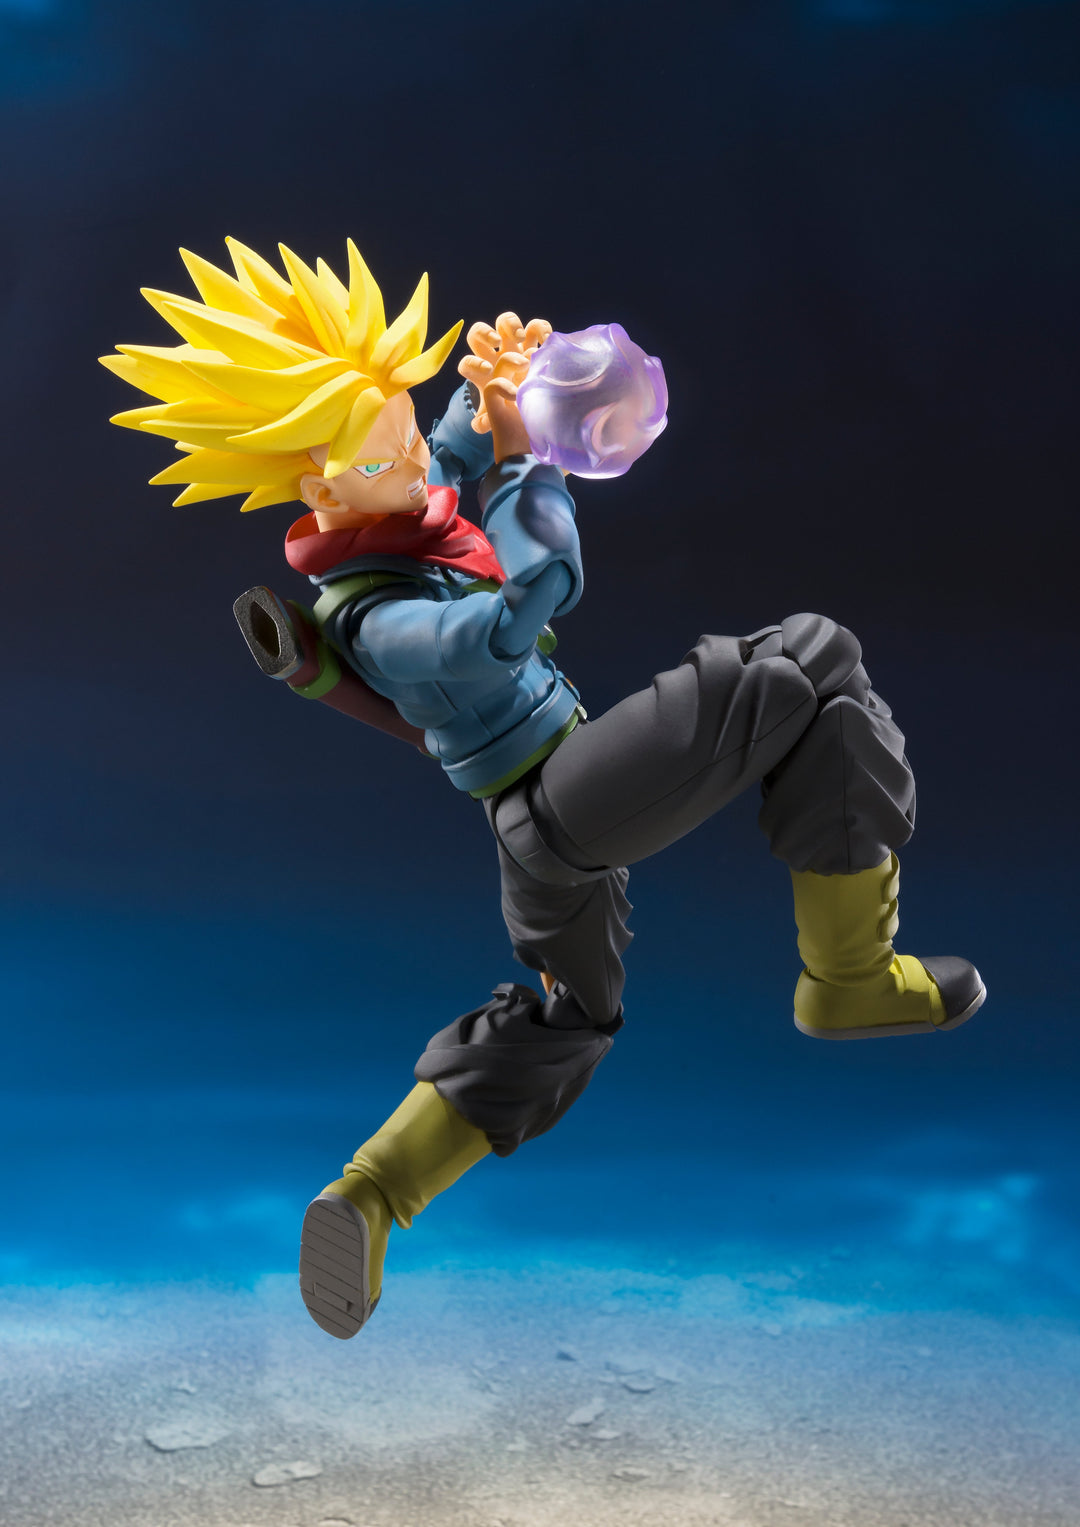 S.H.Figuarts Super Saiyan Trunks from the Future